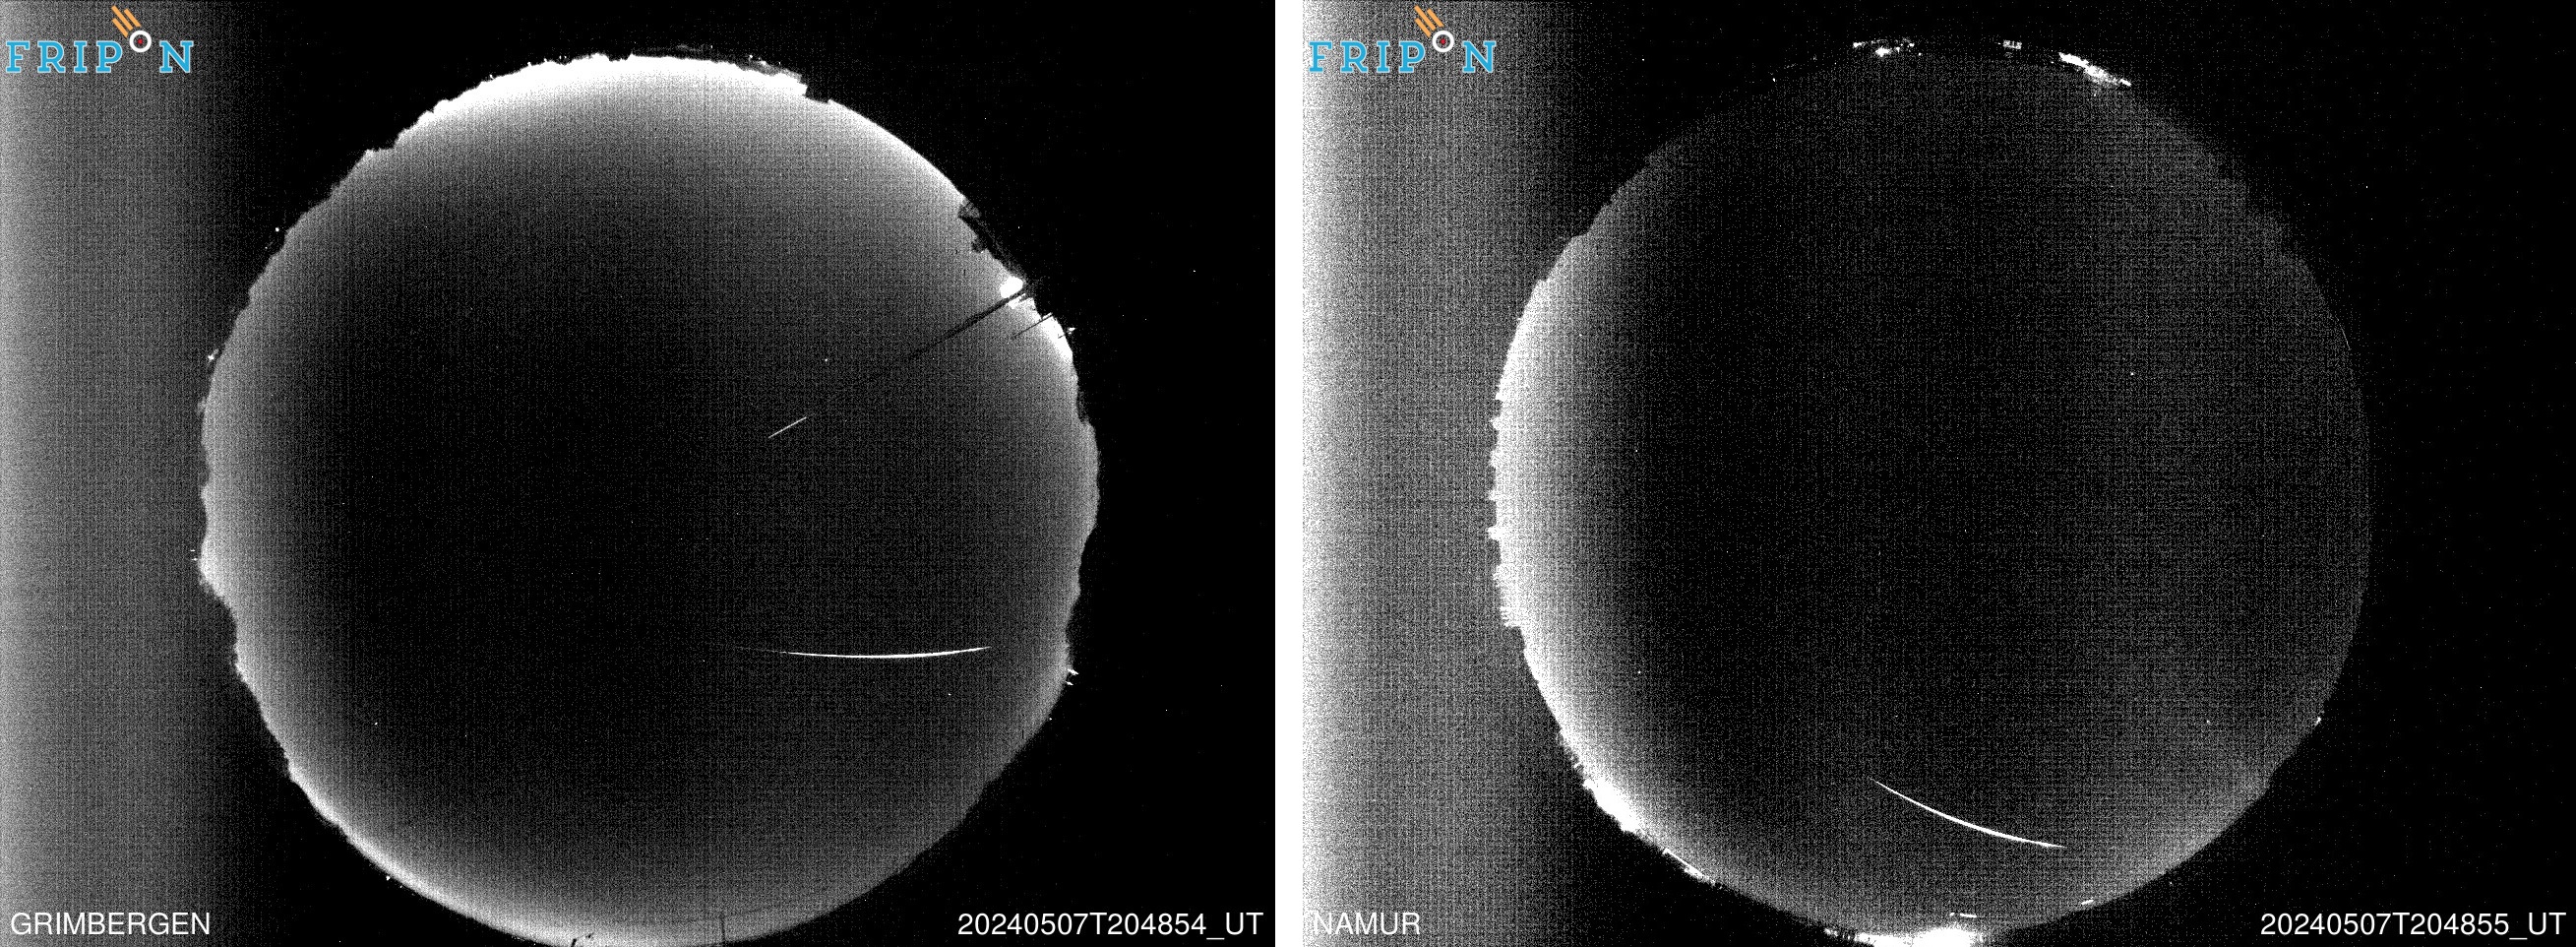 Figure 2- May 7th, 2024, 20h 49min UT fireball was recorded by 6 video stations of Fripon-Belgium network, especially from Grimbergen and Namur. Credit: Fripon-Belgium